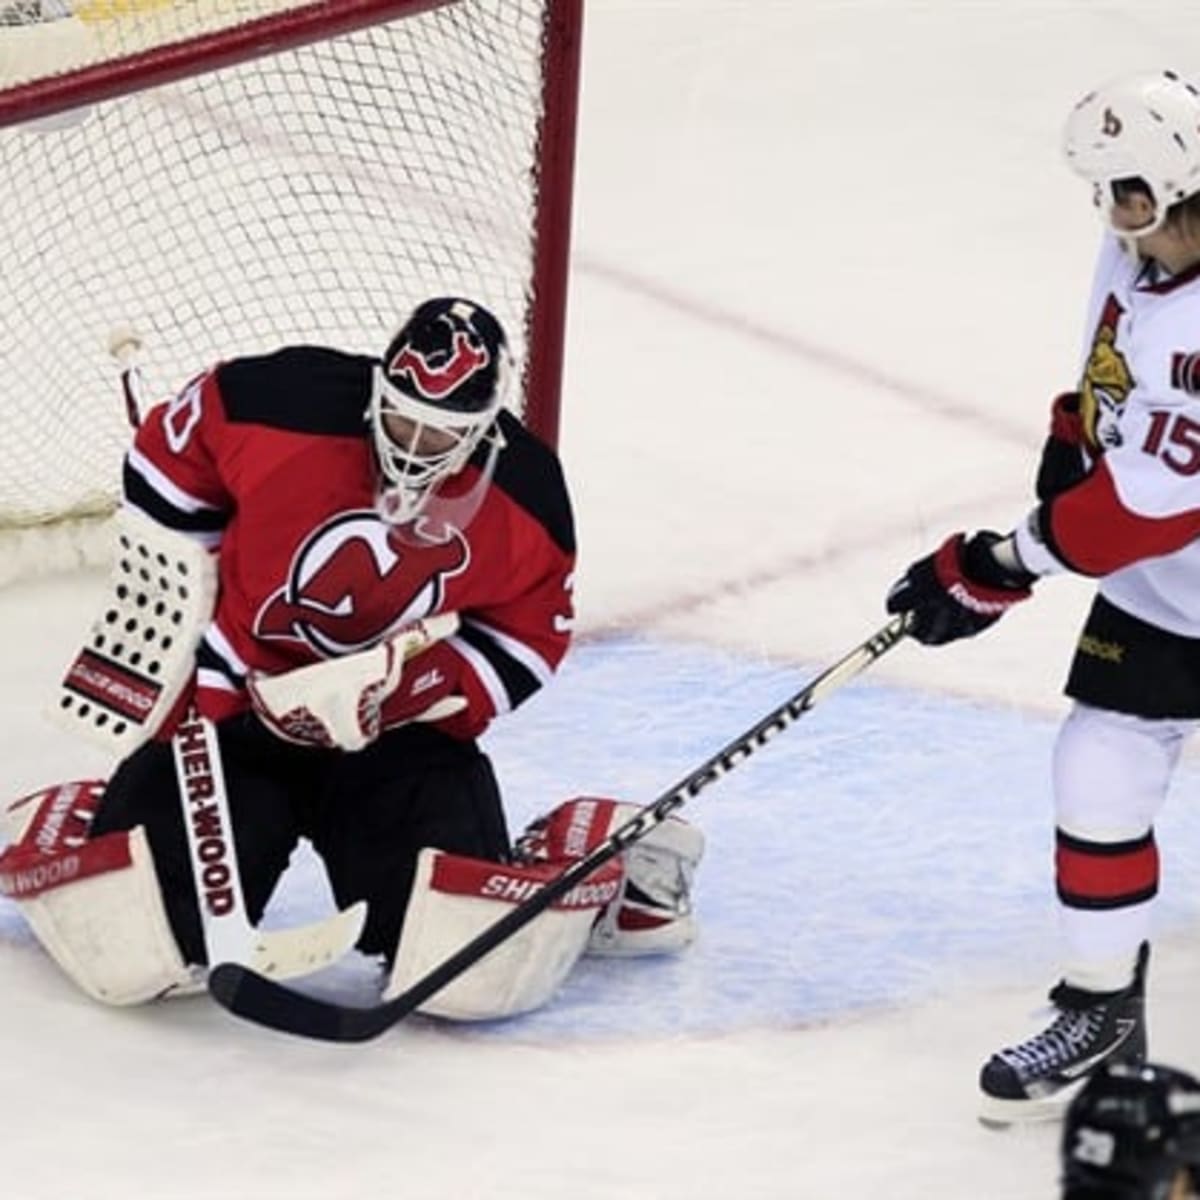 The Devils enter their final preseason game tonight with a 6-0-0 record.  Will New Jersey win and become the fifth team since 2005-06 to go…